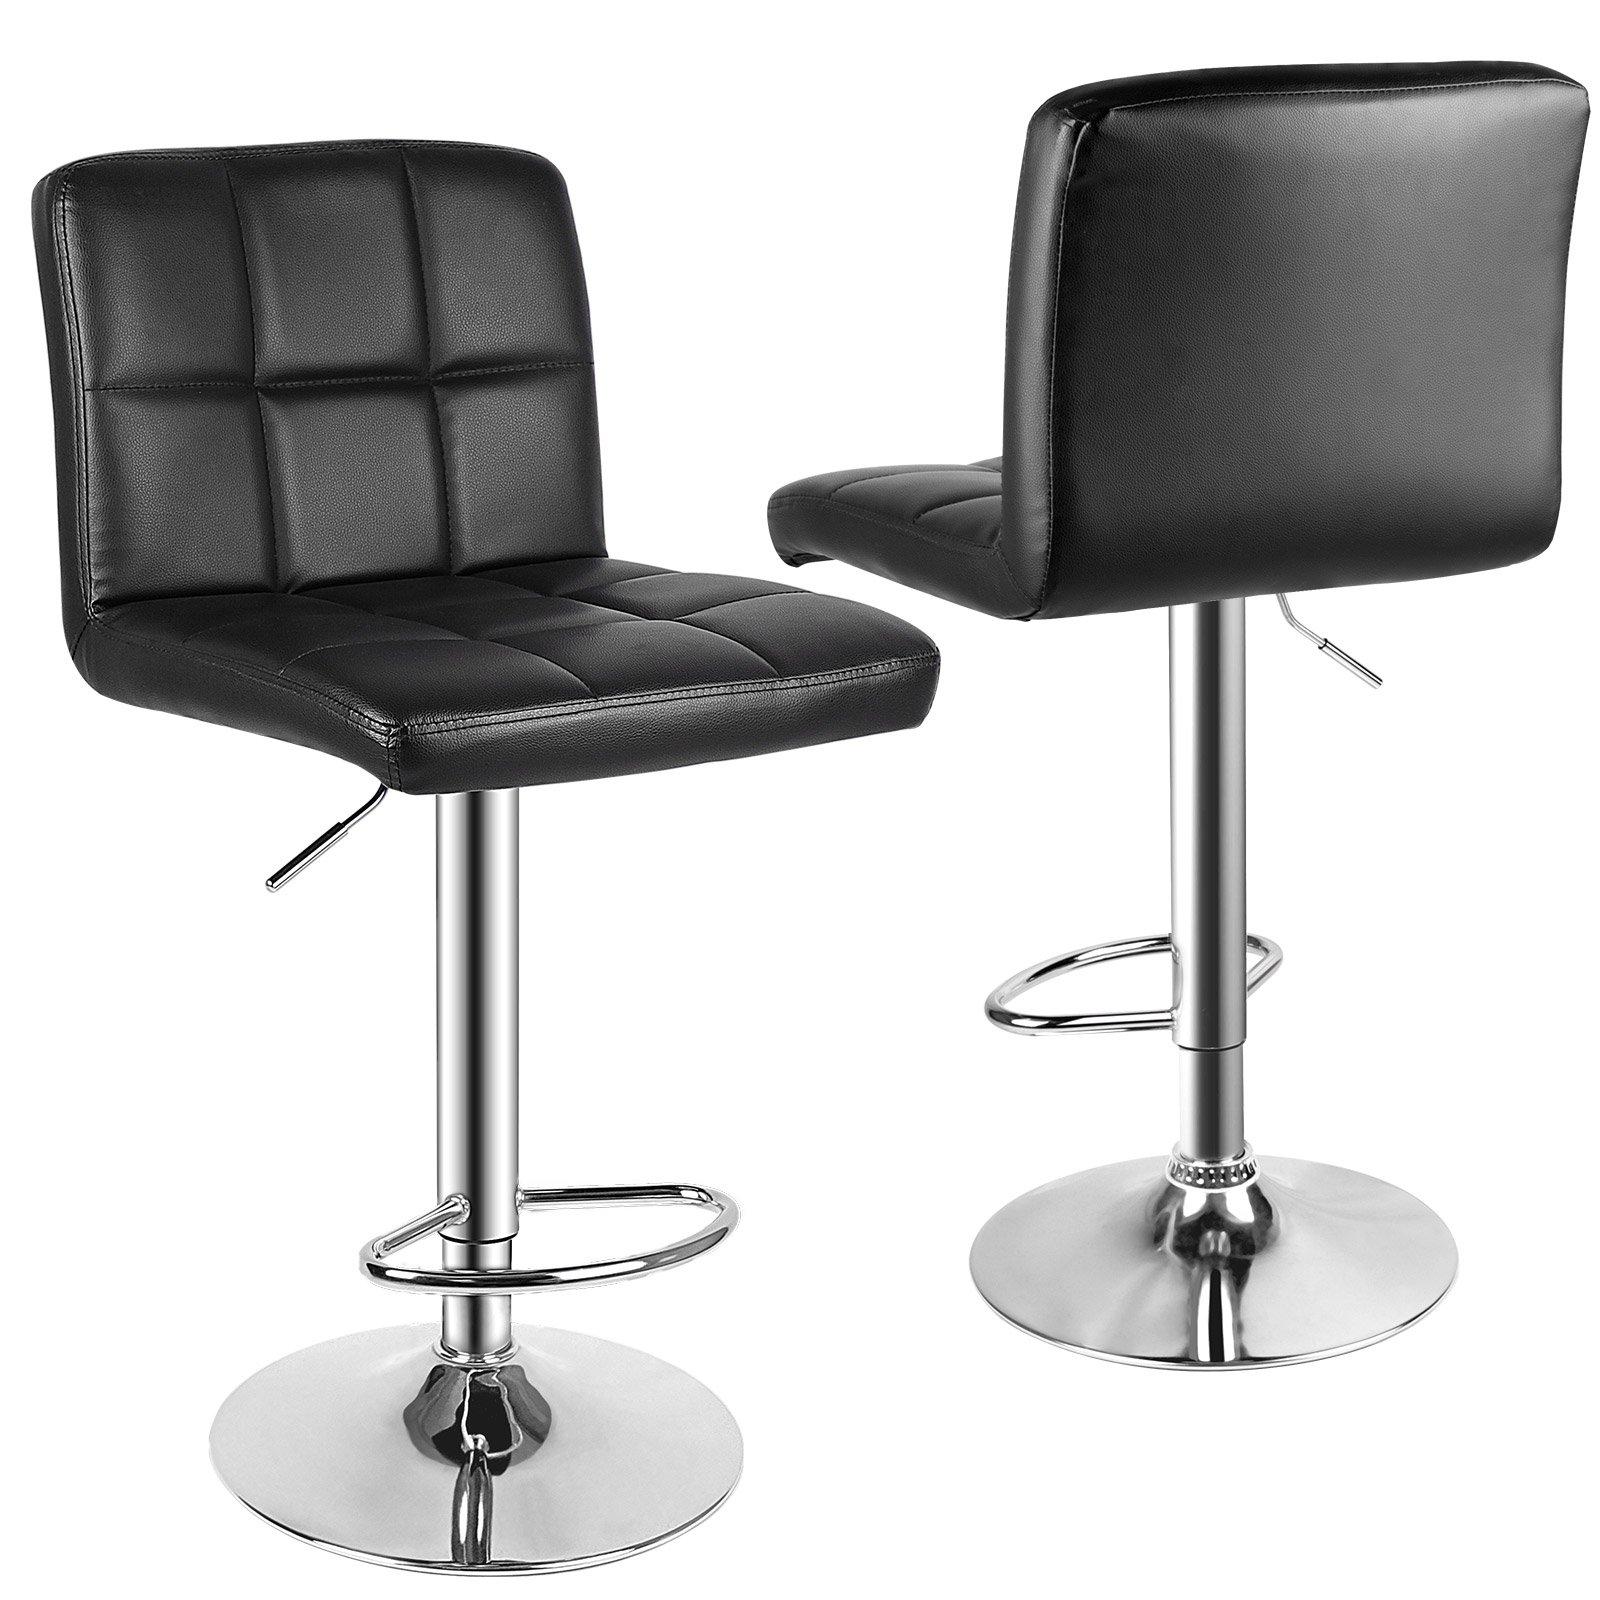 Bar Stools Set of 2 PU Leather Swivel Height Adjustable Bar Chairs With Backrest For Breakfast Bar, 